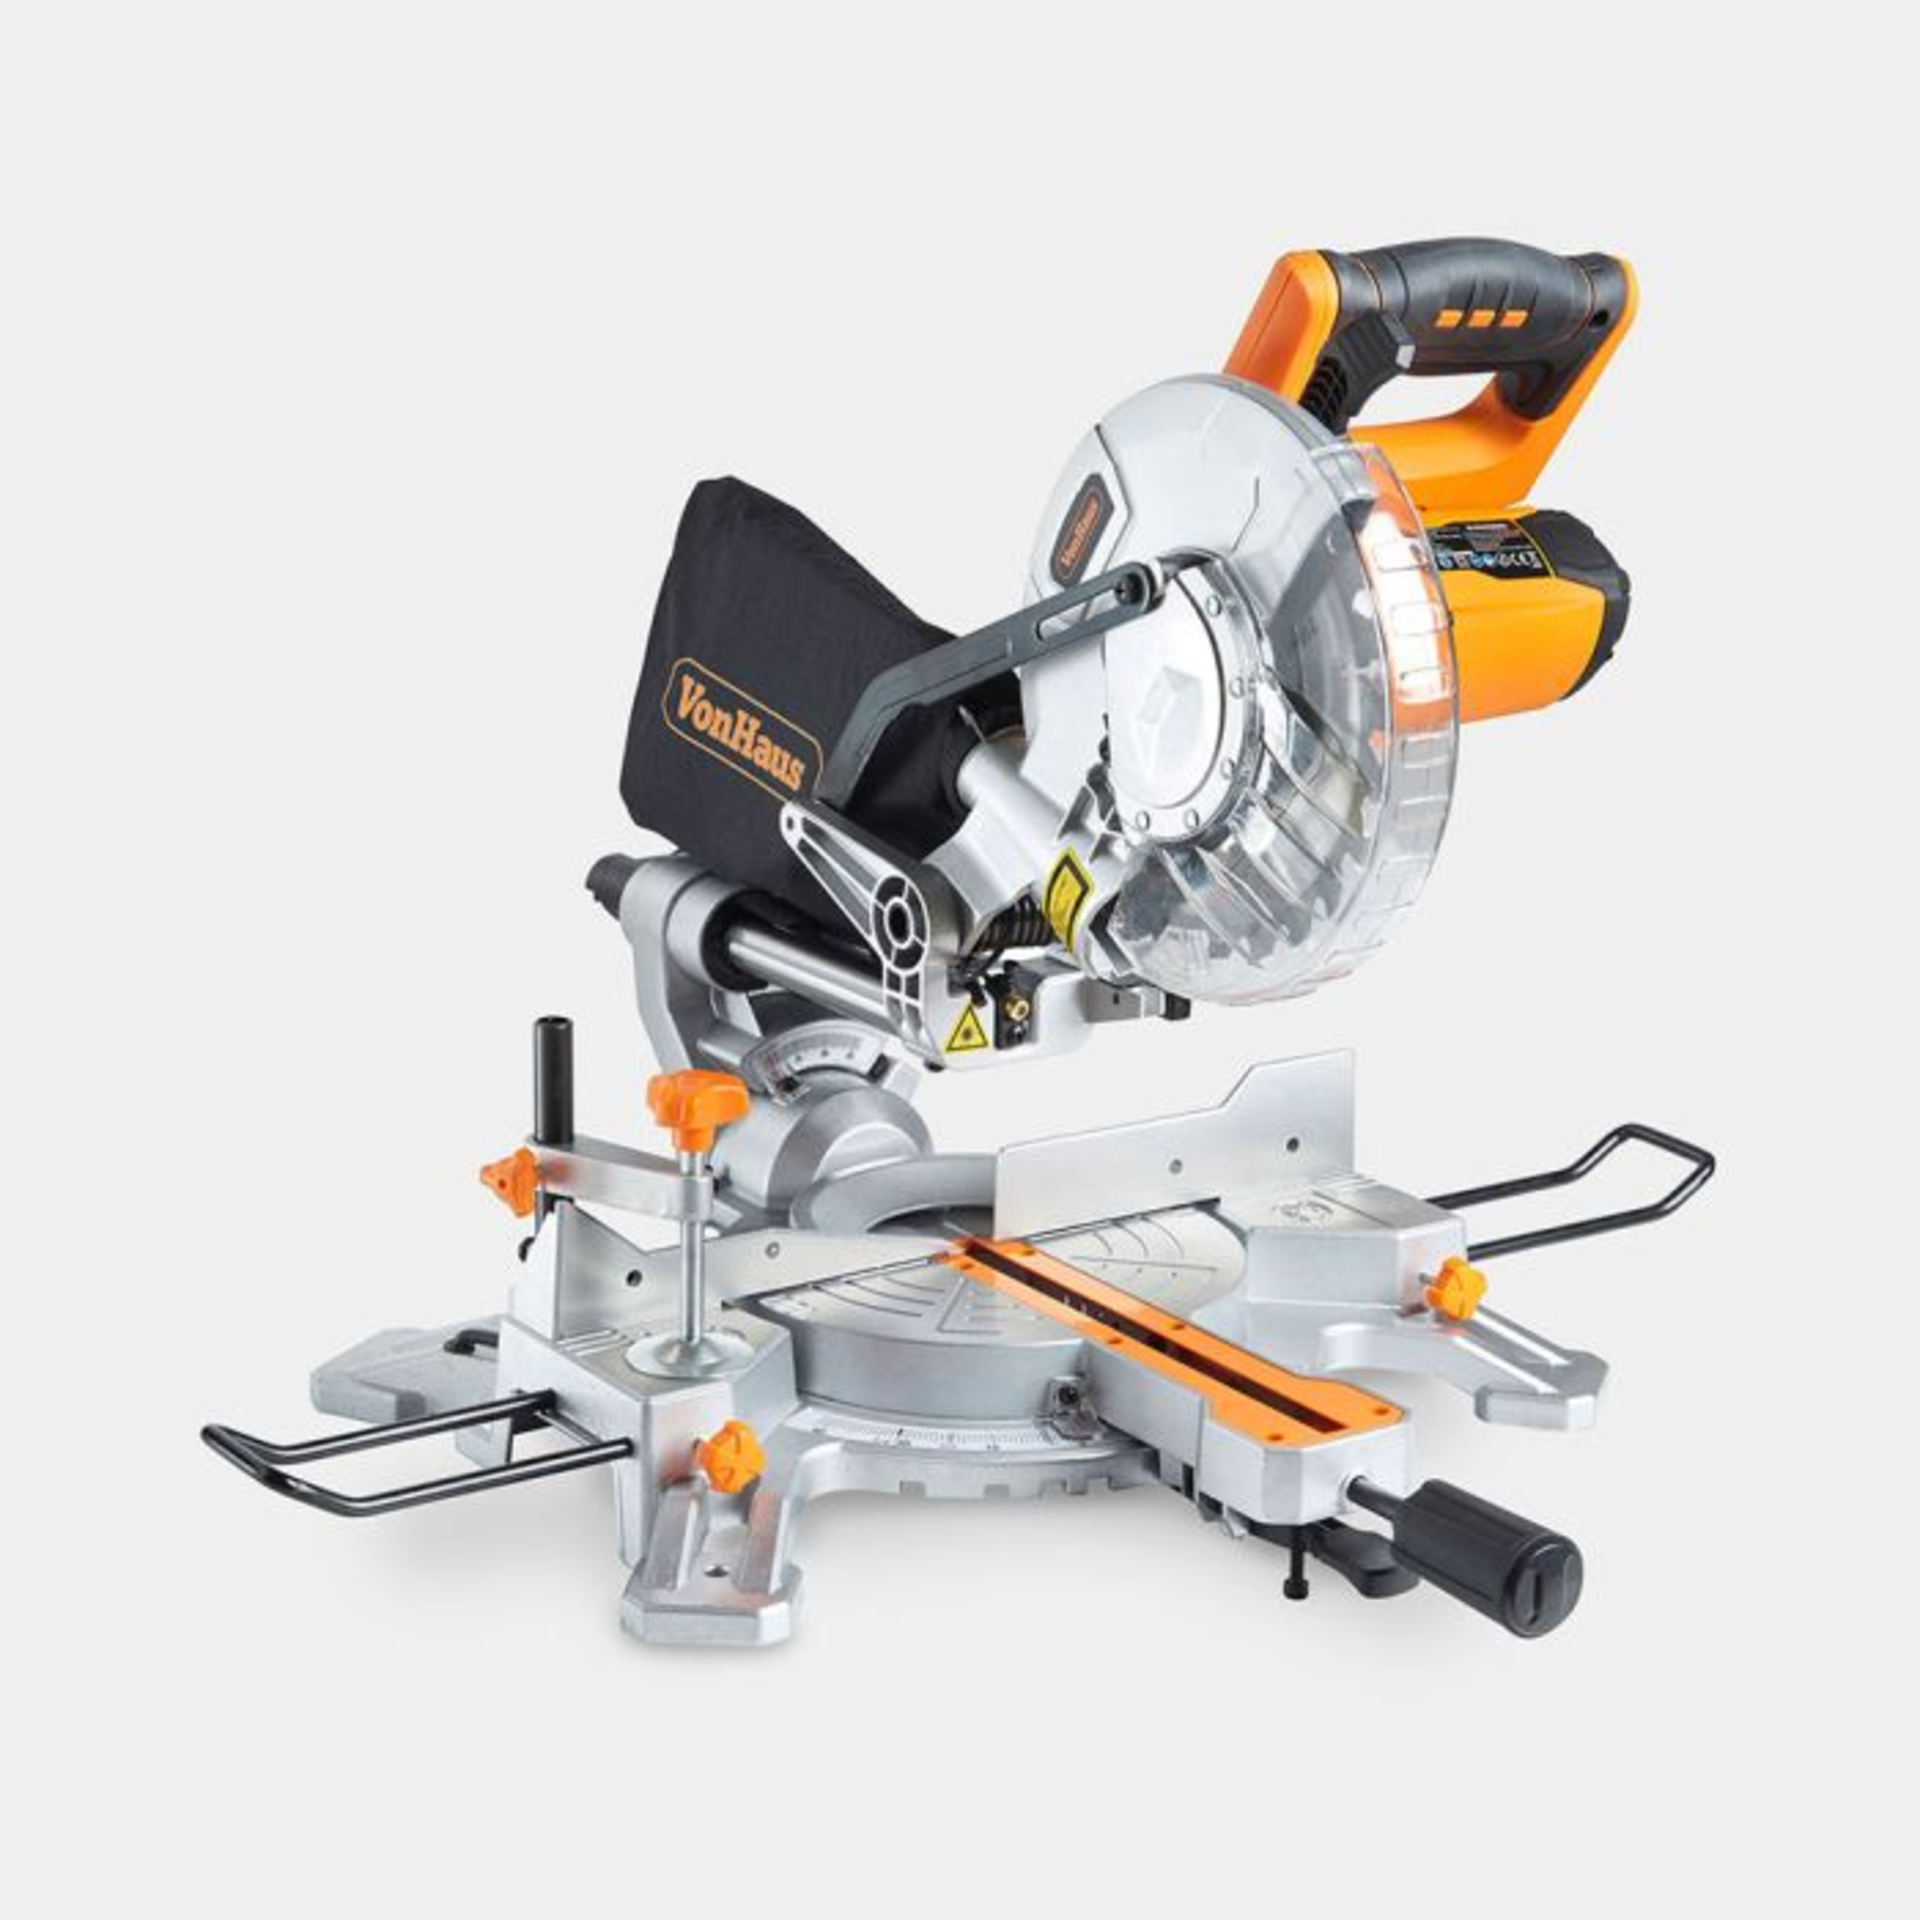 Sliding Mitre Saw 1500W 8” (ER32) Luxury 1500W Sliding Mitre Saw. Fast, clean and accurate, the